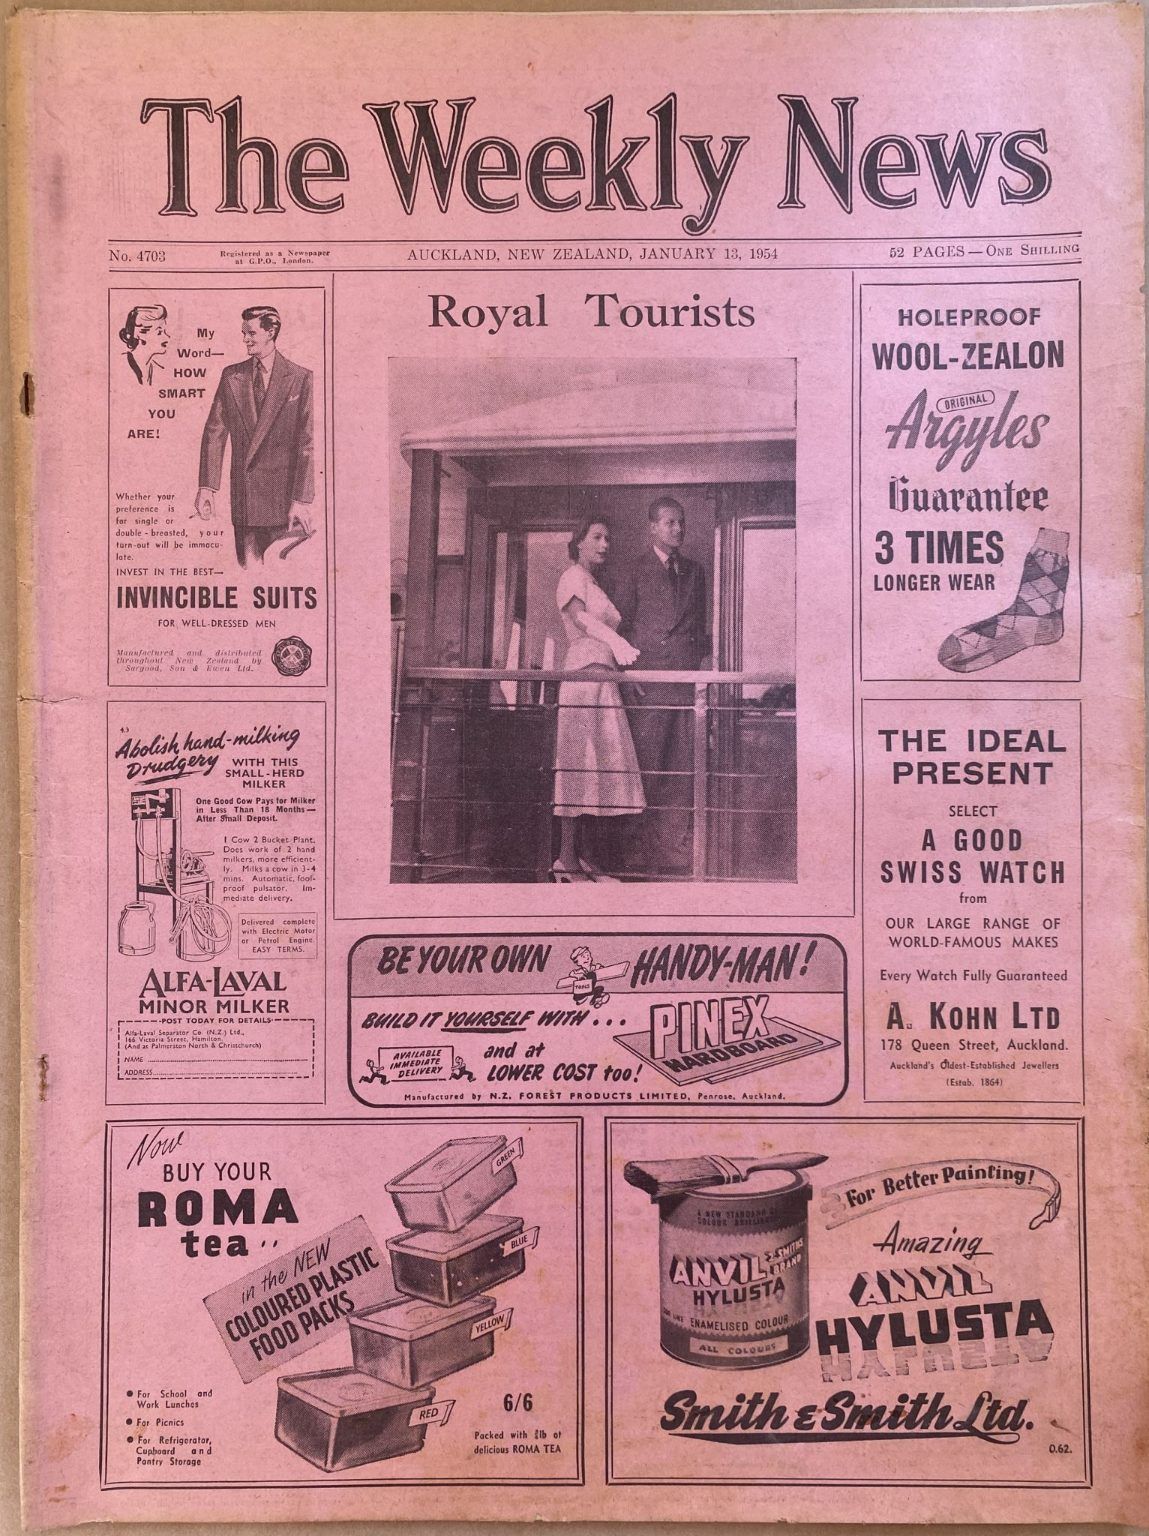 OLD NEWSPAPER: The Weekly News - No. 4703, 13 January 1954